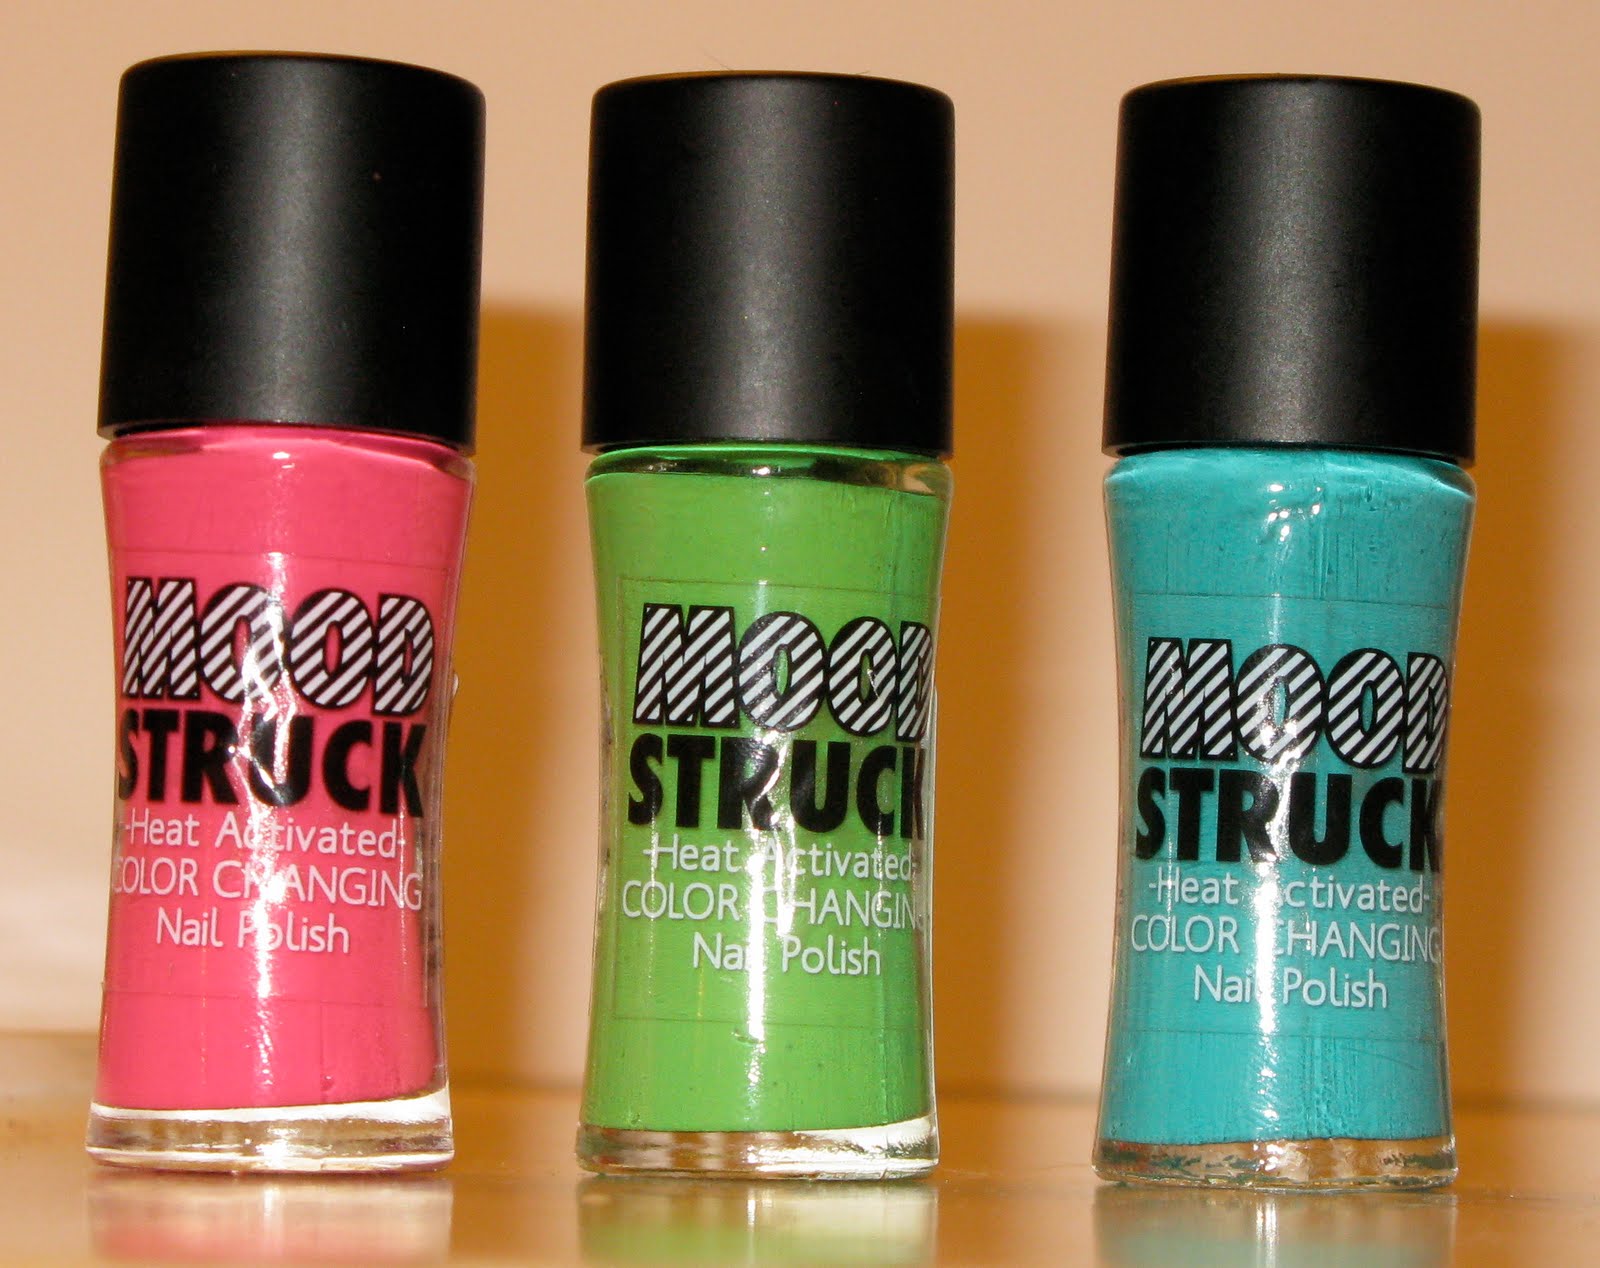 2. Color Changing Nail Polish - wide 2